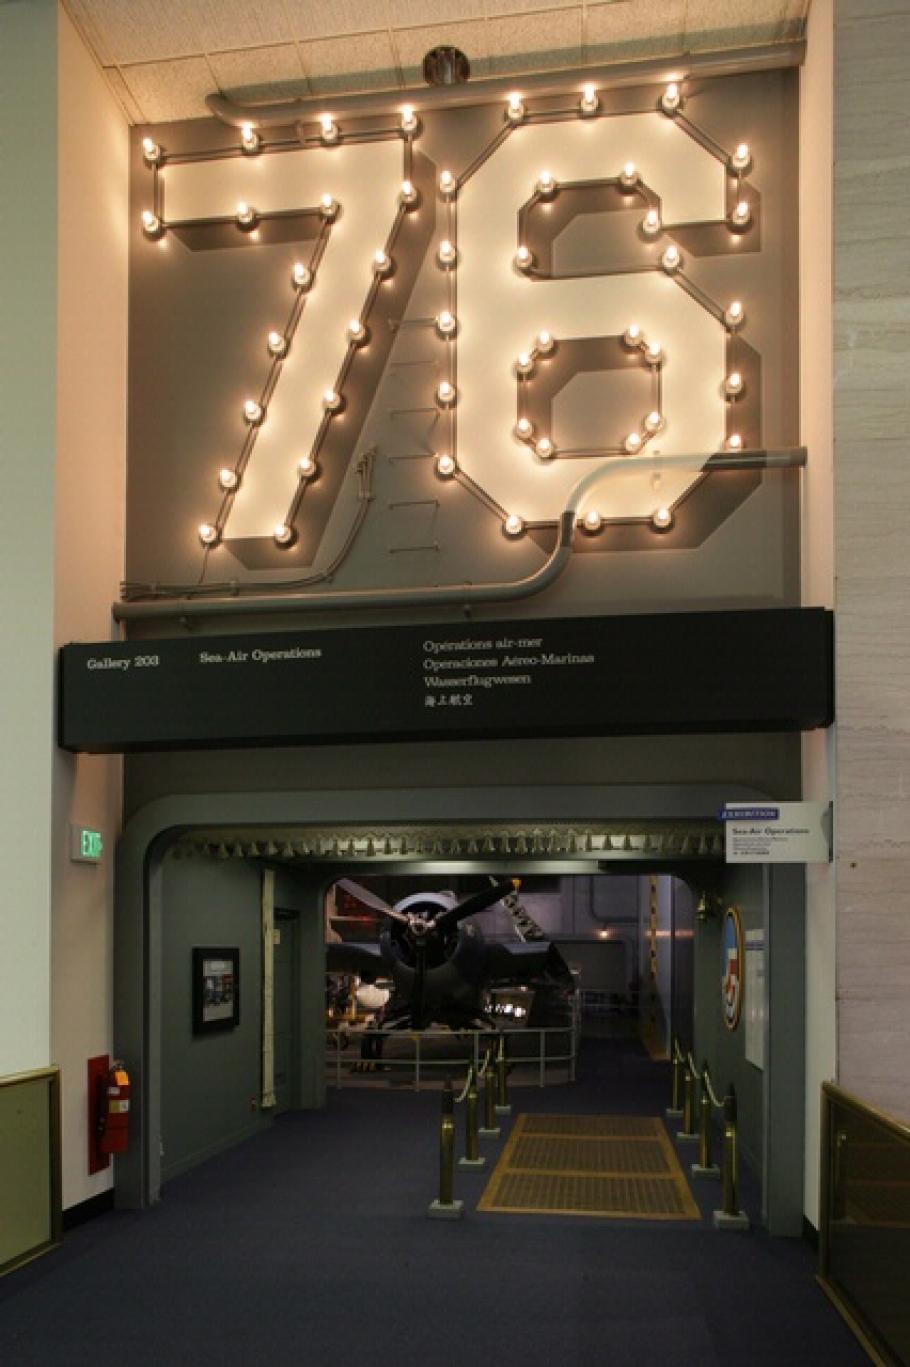 Sea-Air Operations Gallery Entrance